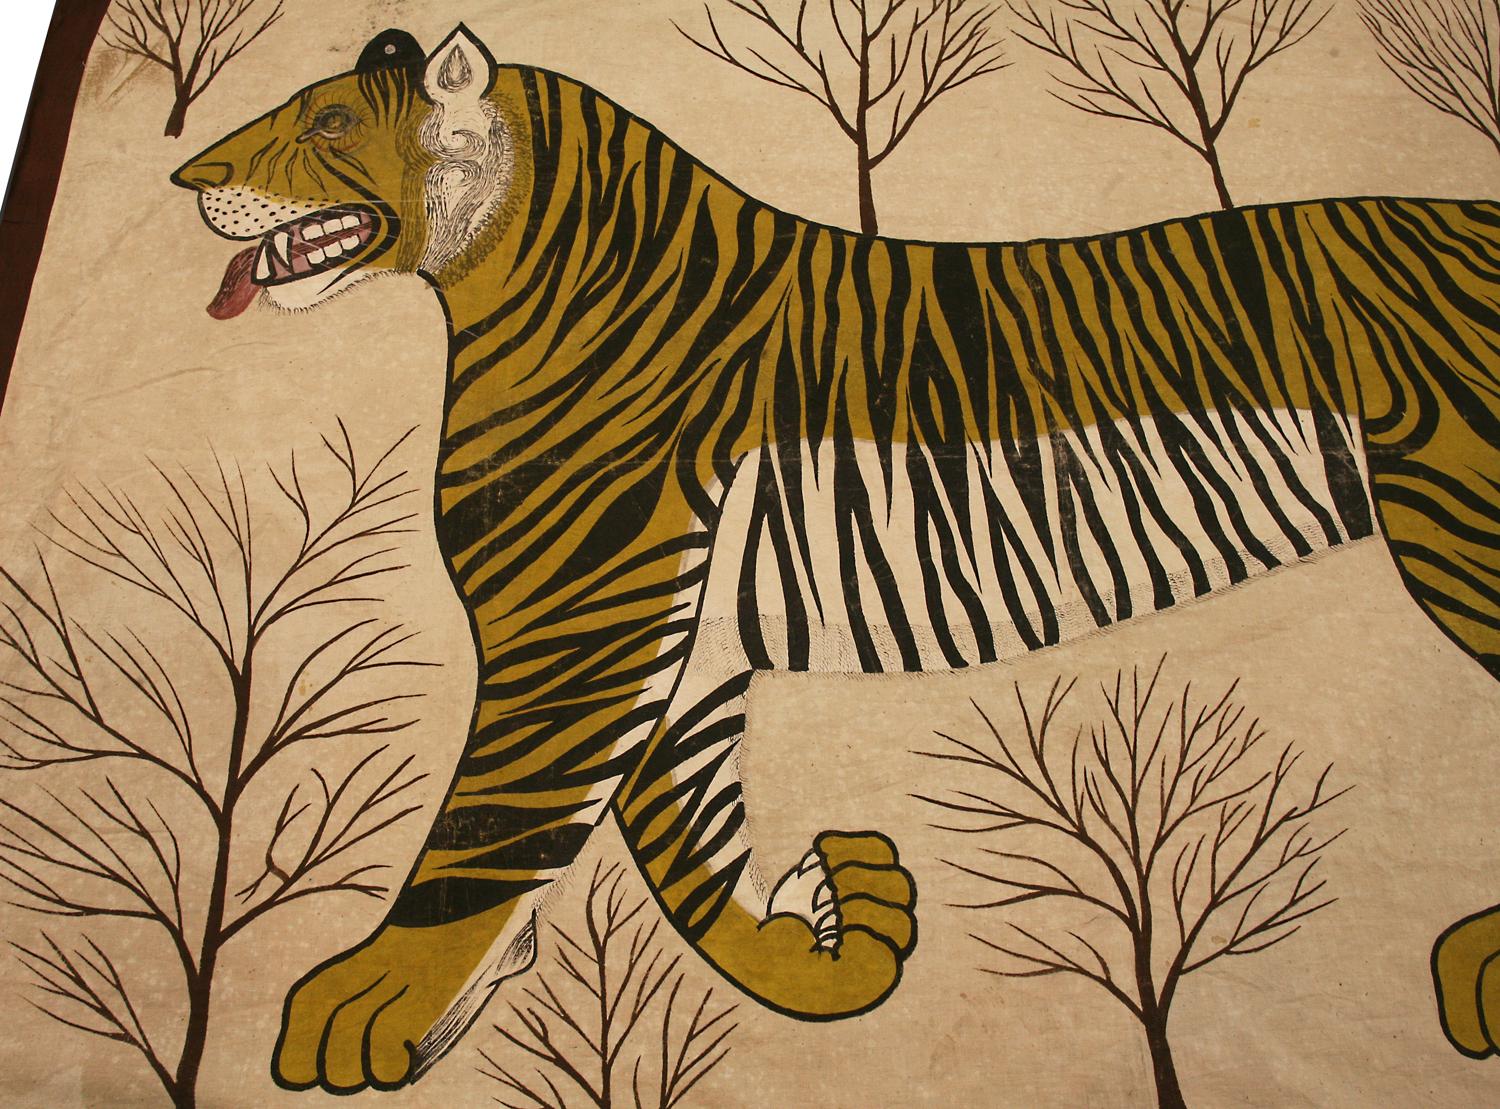 A Remarkable and attractive antique handmade textile that can win the heart of any person. The existence of the tiger has always been a symbol of power and strength and you can instantly feel that power by looking at this amazing textile. Great